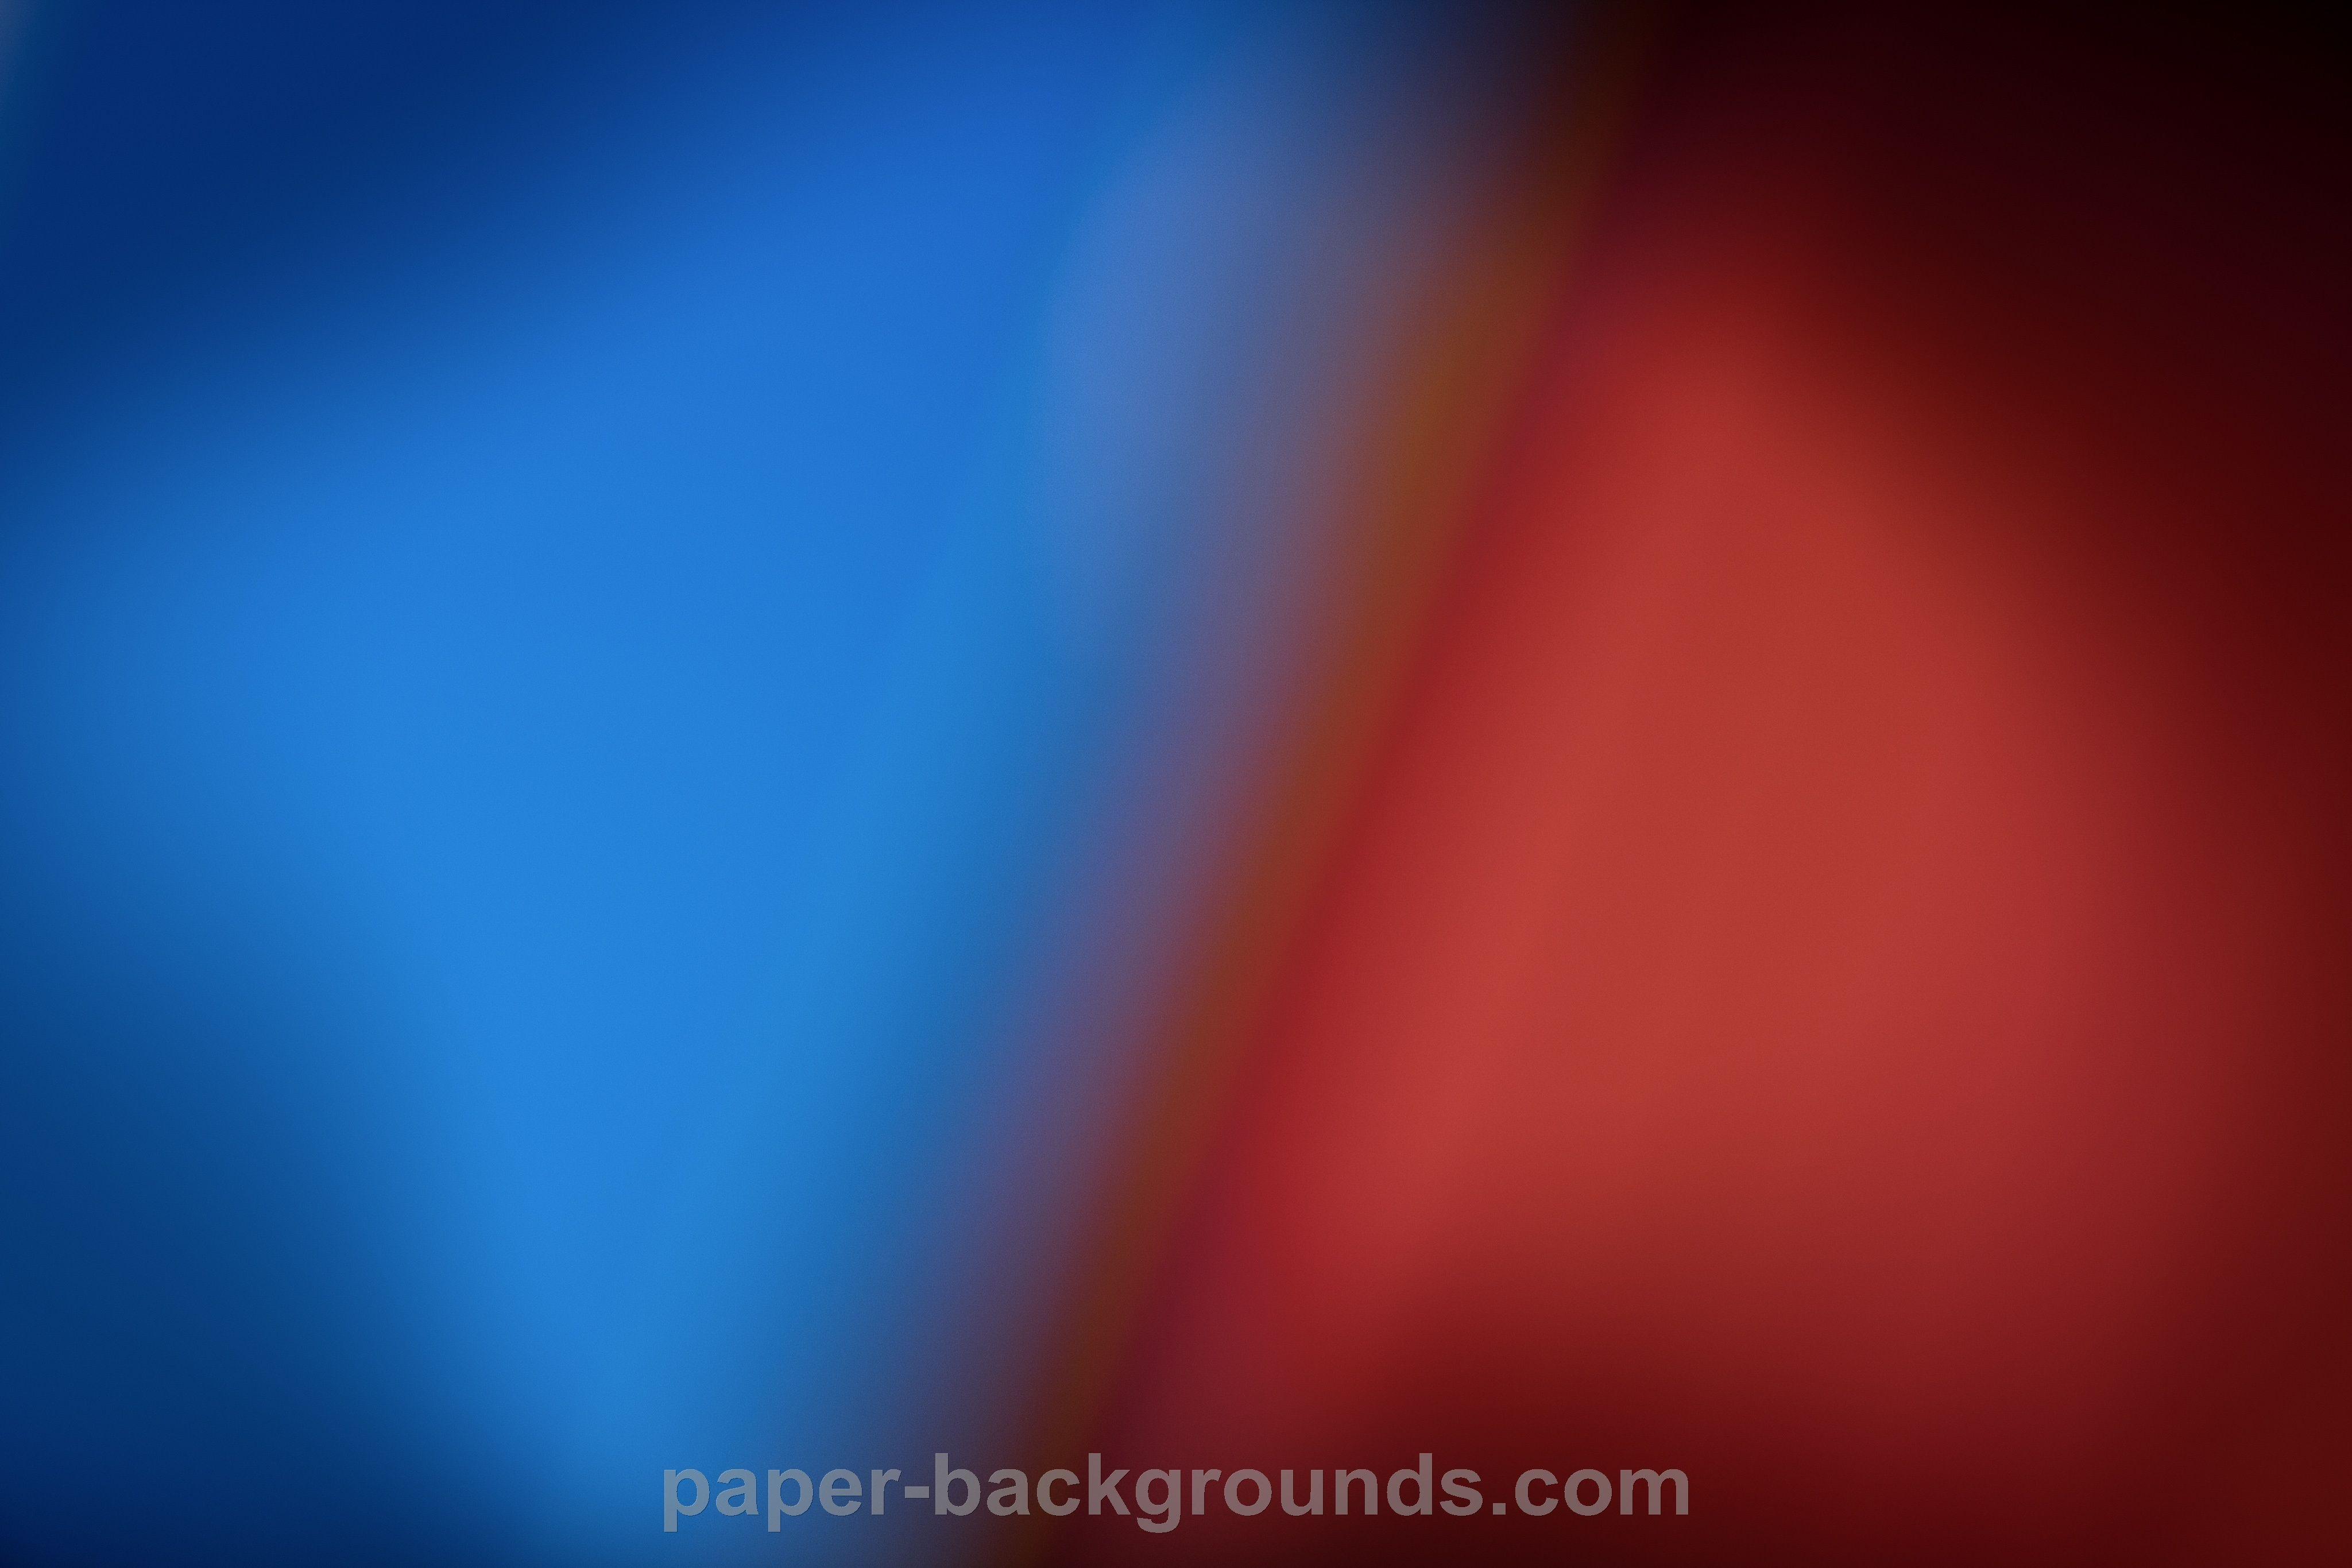 Blue and Red N Logo - Red Light Blue Wallpapers and Background Images - stmed.net